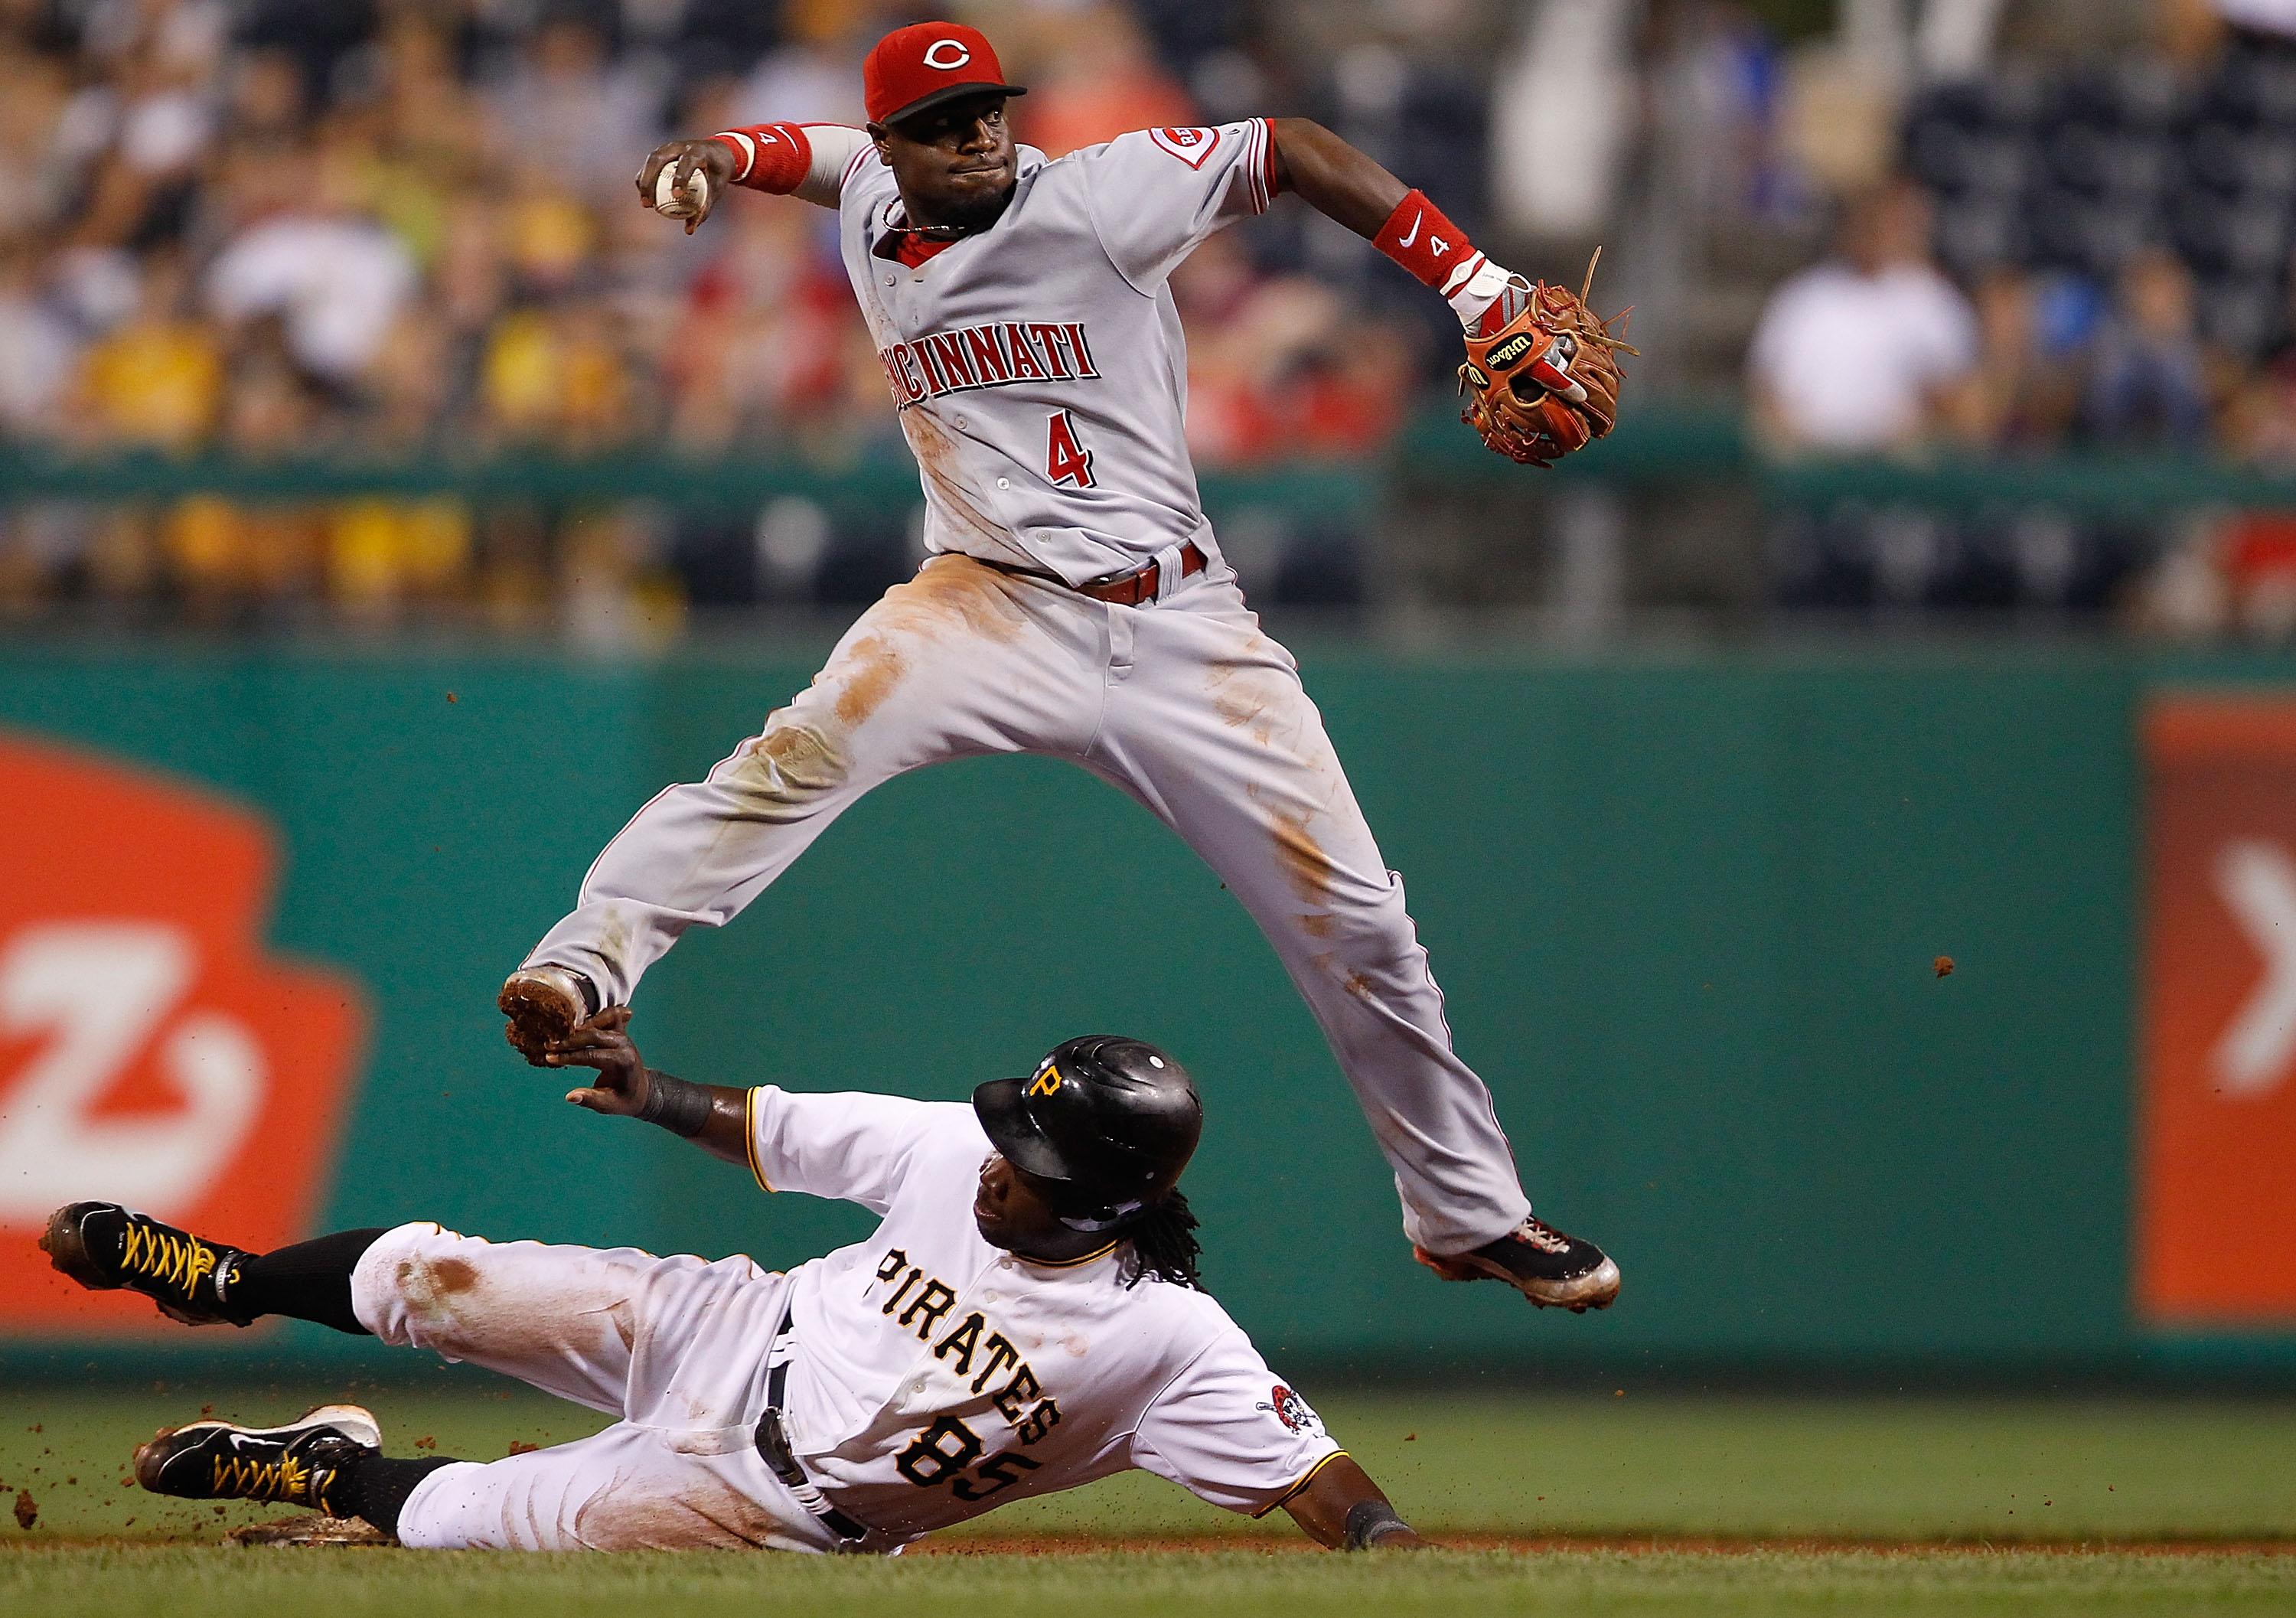 PITTSBURGH - AUGUST 03:  Brandon Phillips #4 of the Cincinnati Reds attempts to turn the double play over Lastings Milledge #85 of the Pittsburgh Pirates during the game on August 3, 2010 at PNC Park in Pittsburgh, Pennsylvania.  (Photo by Jared Wickerham